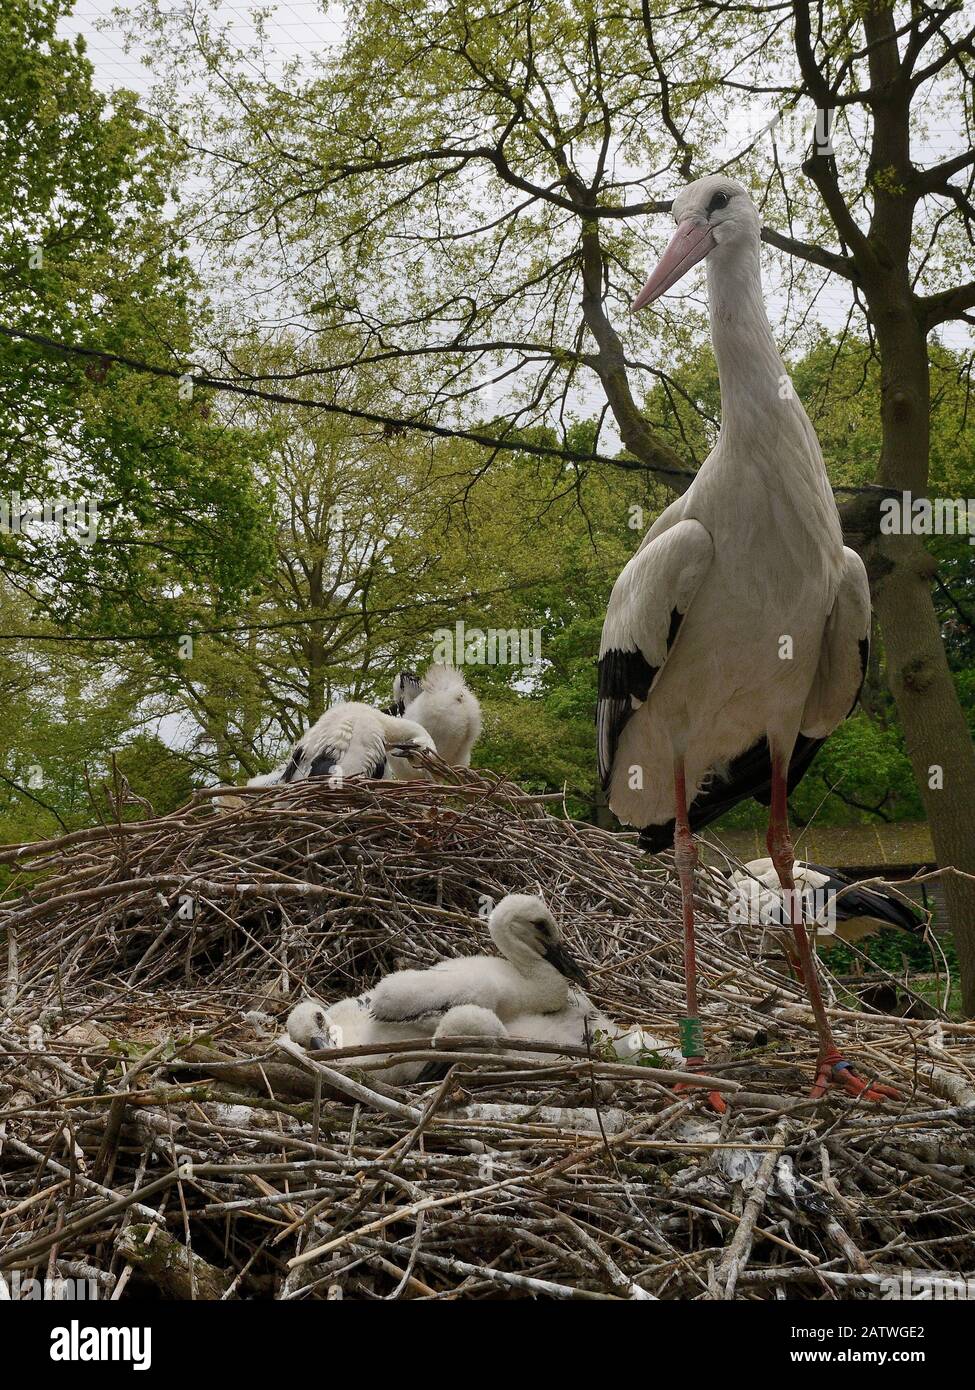 White stork (Ciconia ciconia) nest at captive breeding colony raising chicks for UK White Stork reintroduction project at the Knepp Estate. Cotswold Wildlife Park, Oxfordshire, UK, May 2019. Stock Photo